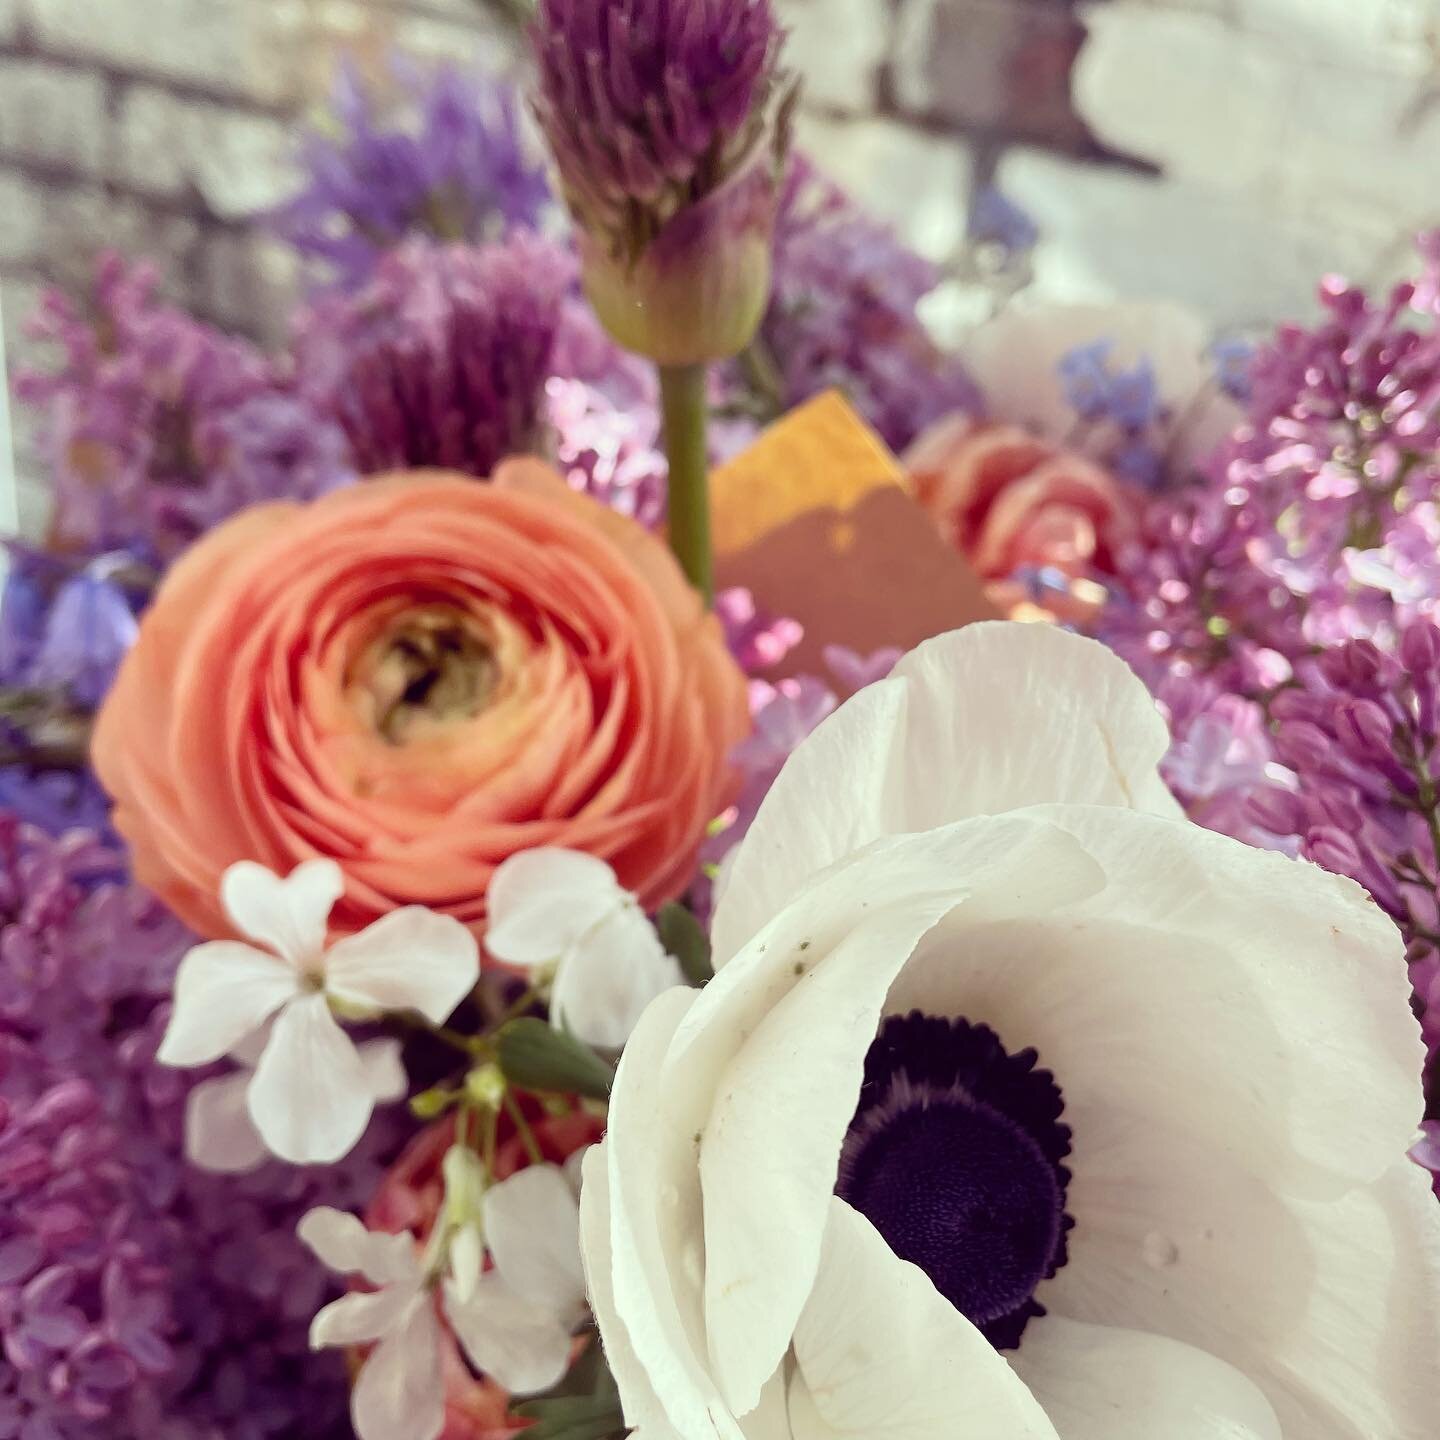 💐Bristol💐Flower💐Deliveries💐

Place your orders now for bouquet deliveries this week.

As always we&rsquo;ve got locally grown seasonal flowers, available in 2 set bouquet sizes, delivered by cycle courier across Bristol on Thursday afternoon.

DM